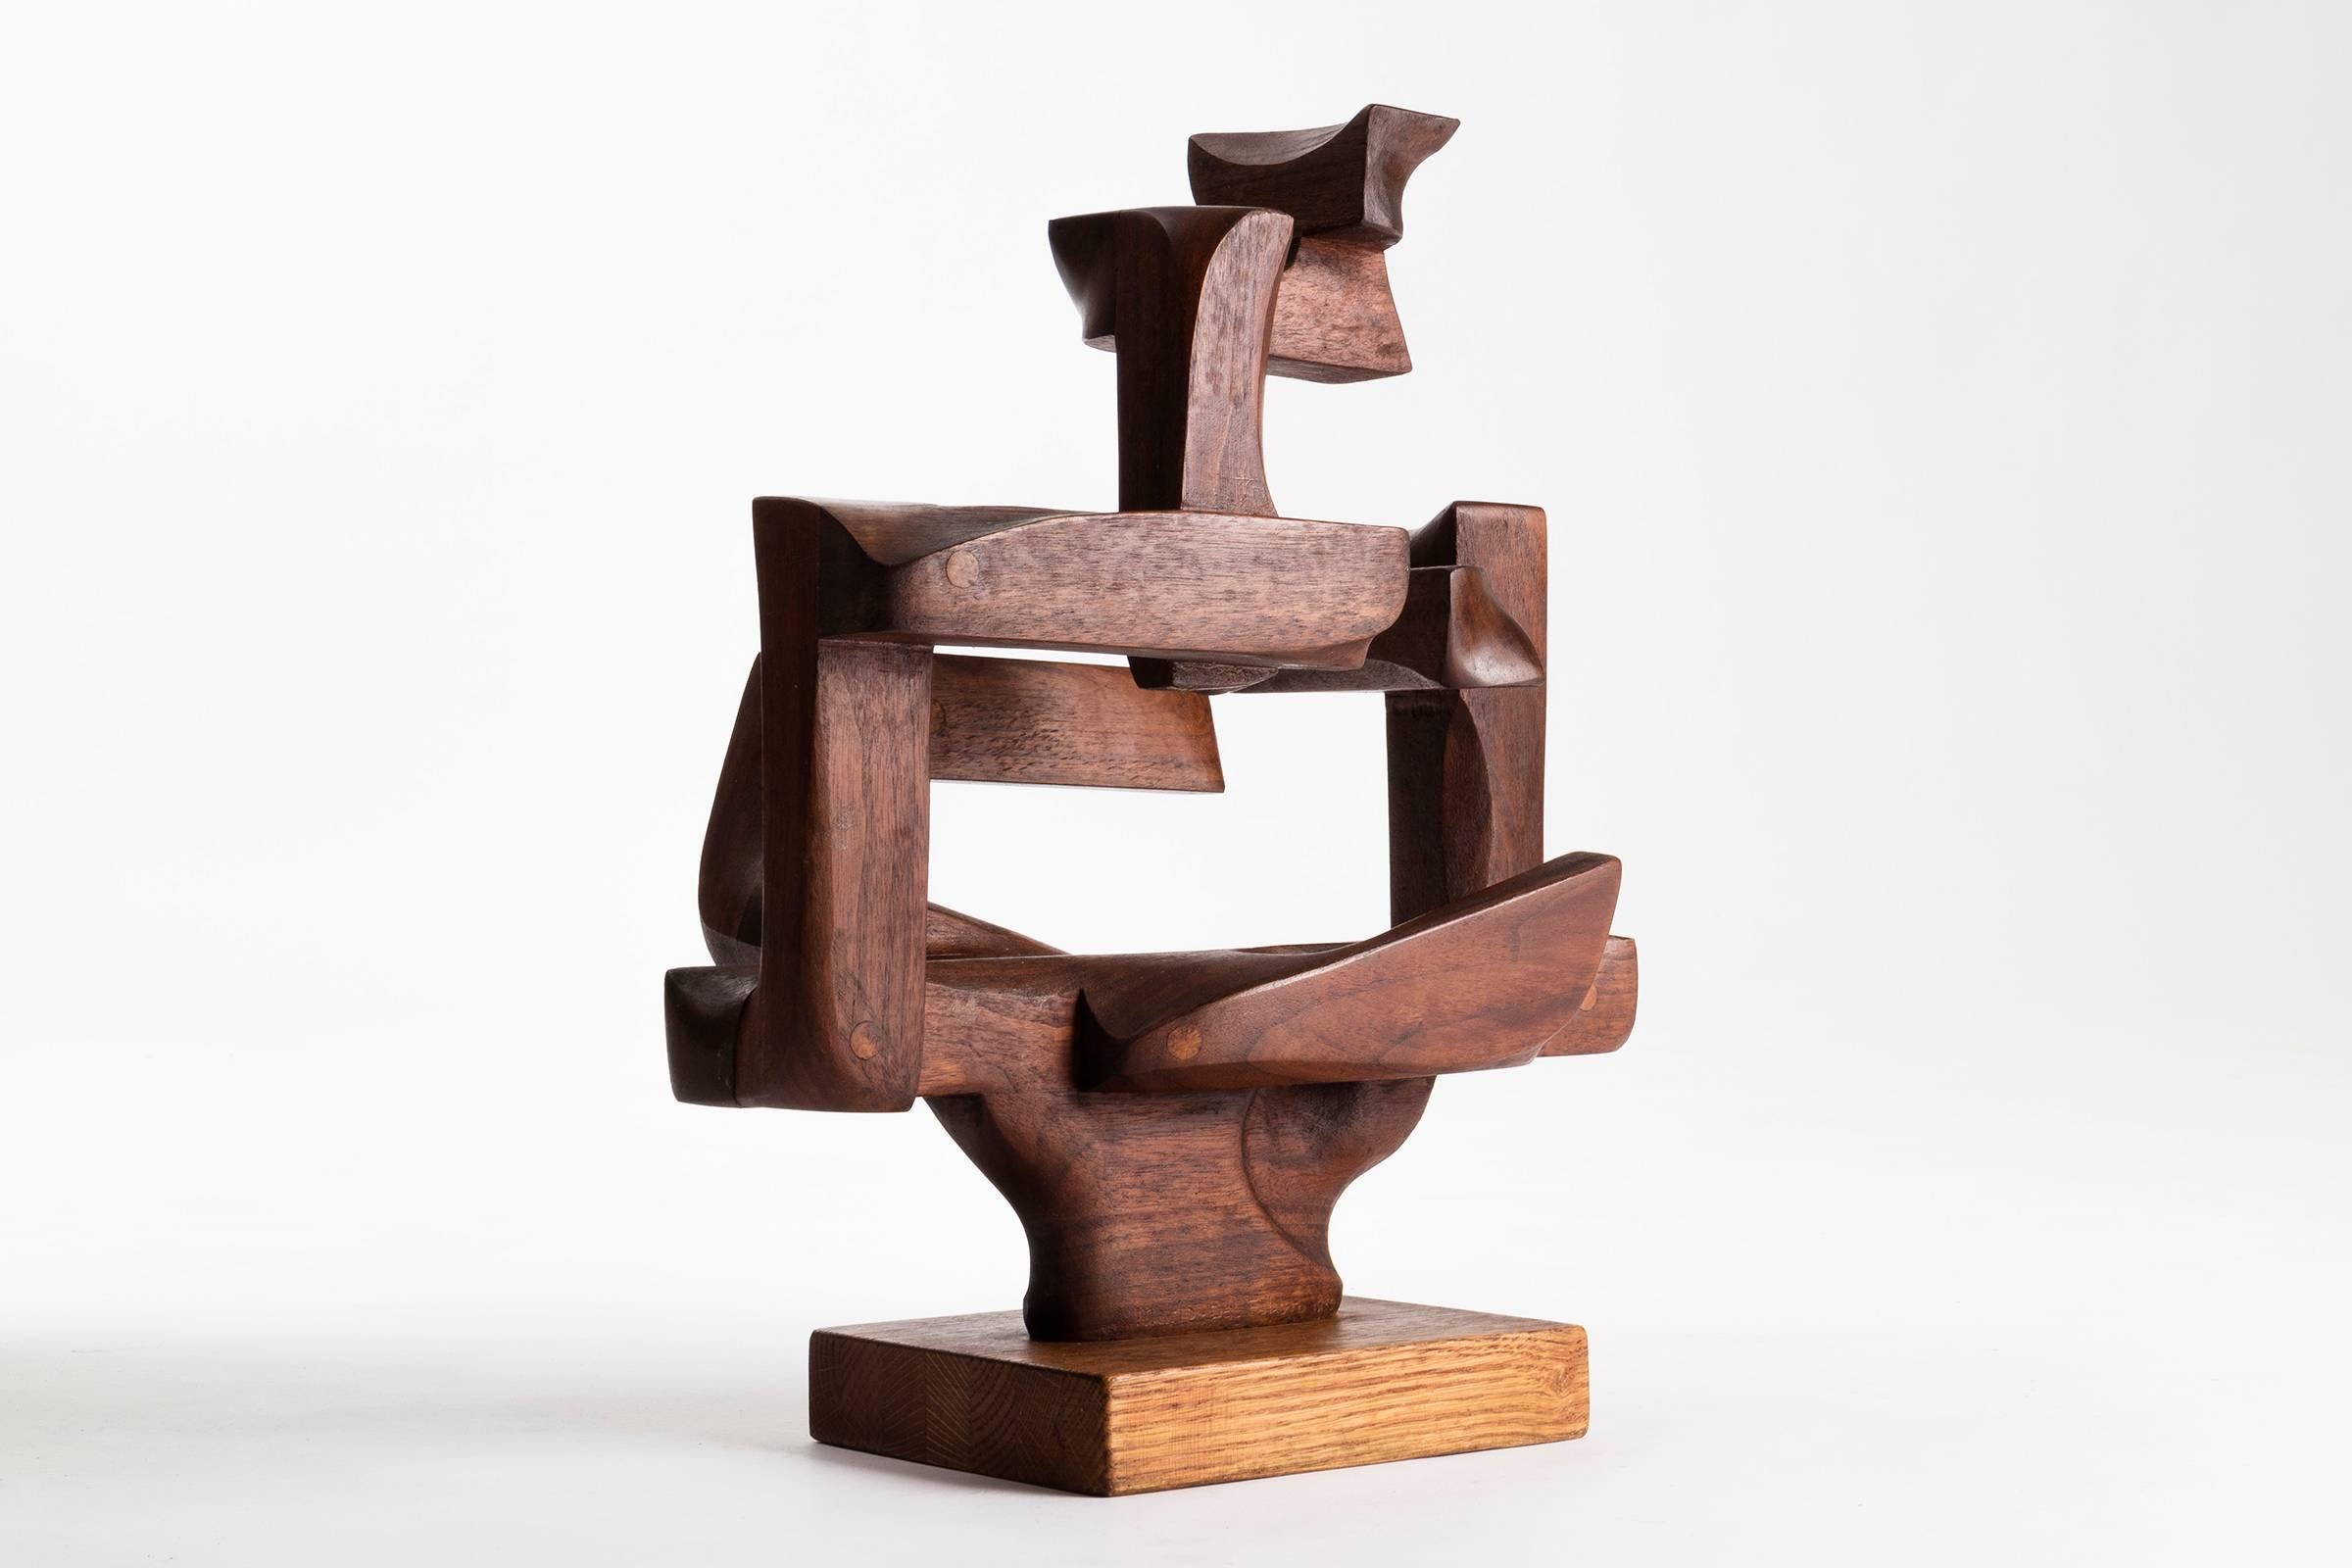 Multi-disciplinary artist Mario Dal Fabbro was born in Cappella Maggiore, Italy in 1913. He trained in his family's furniture design shop prior to attending both the R. Superior Institute for Decorative and Industrial Arts in Venice as well as